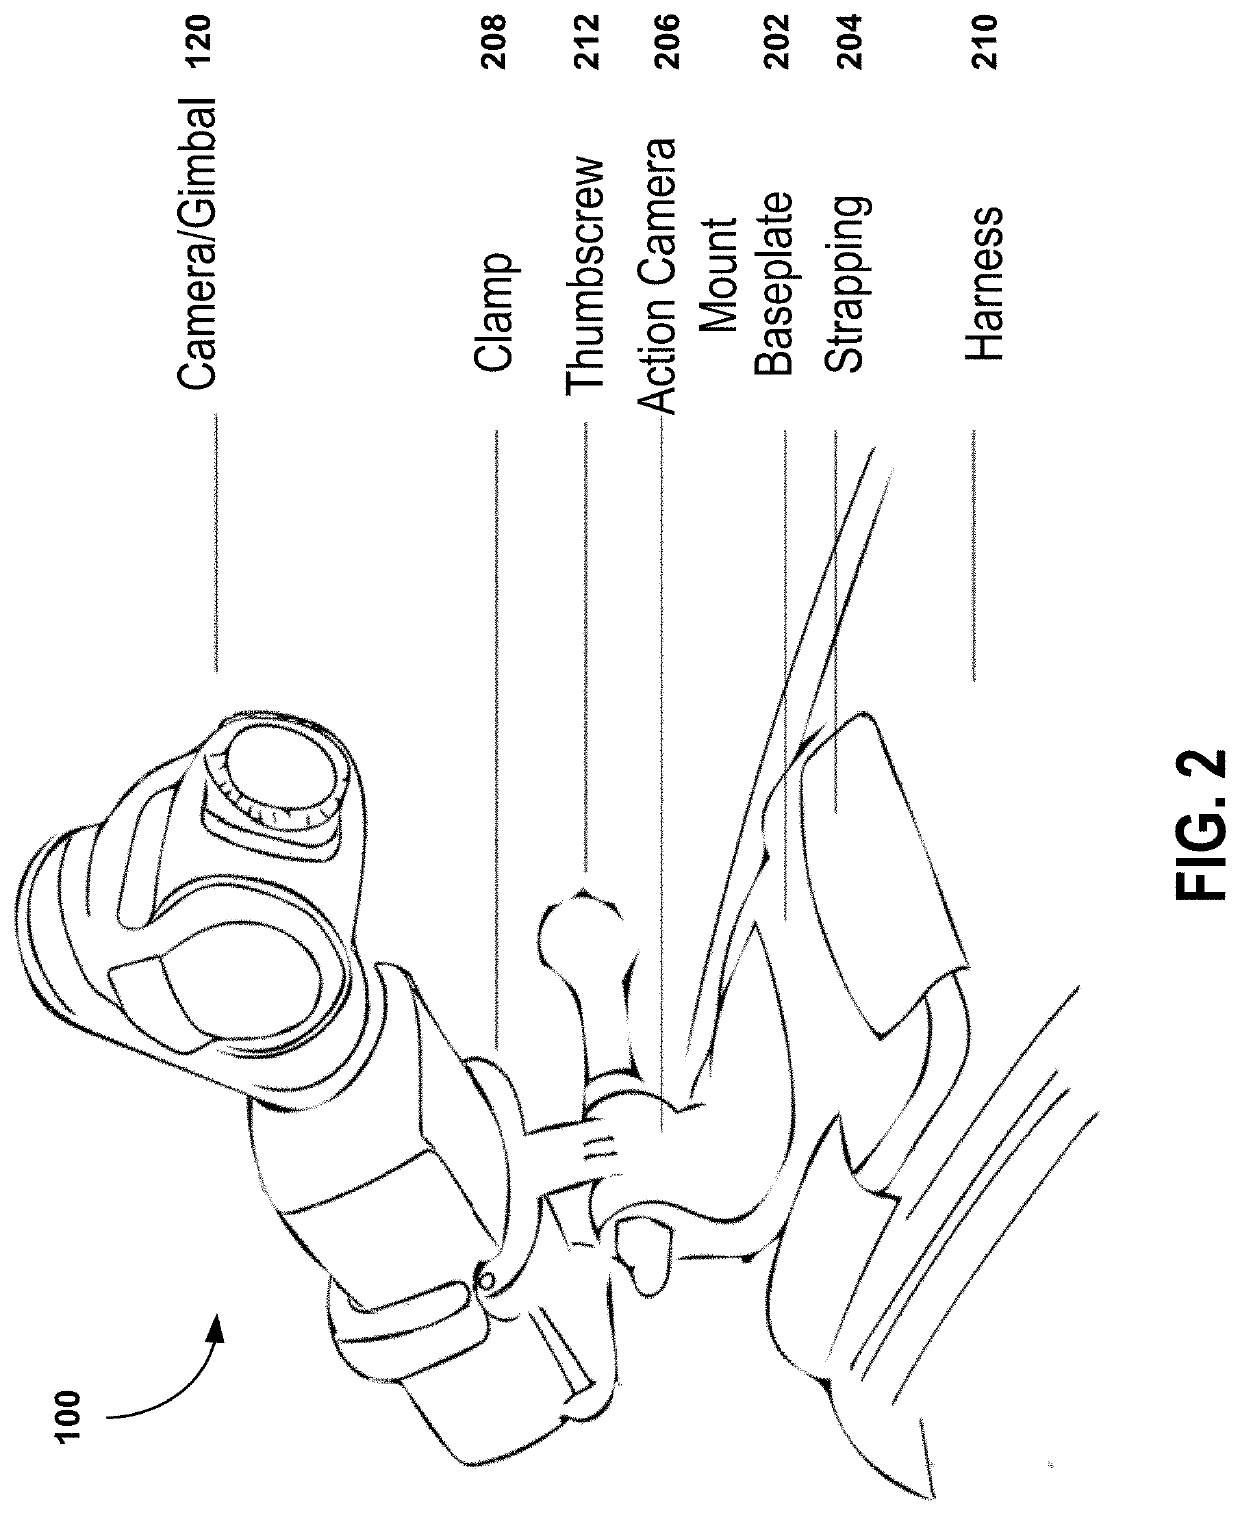 Body-mounted or object-mounted camera system